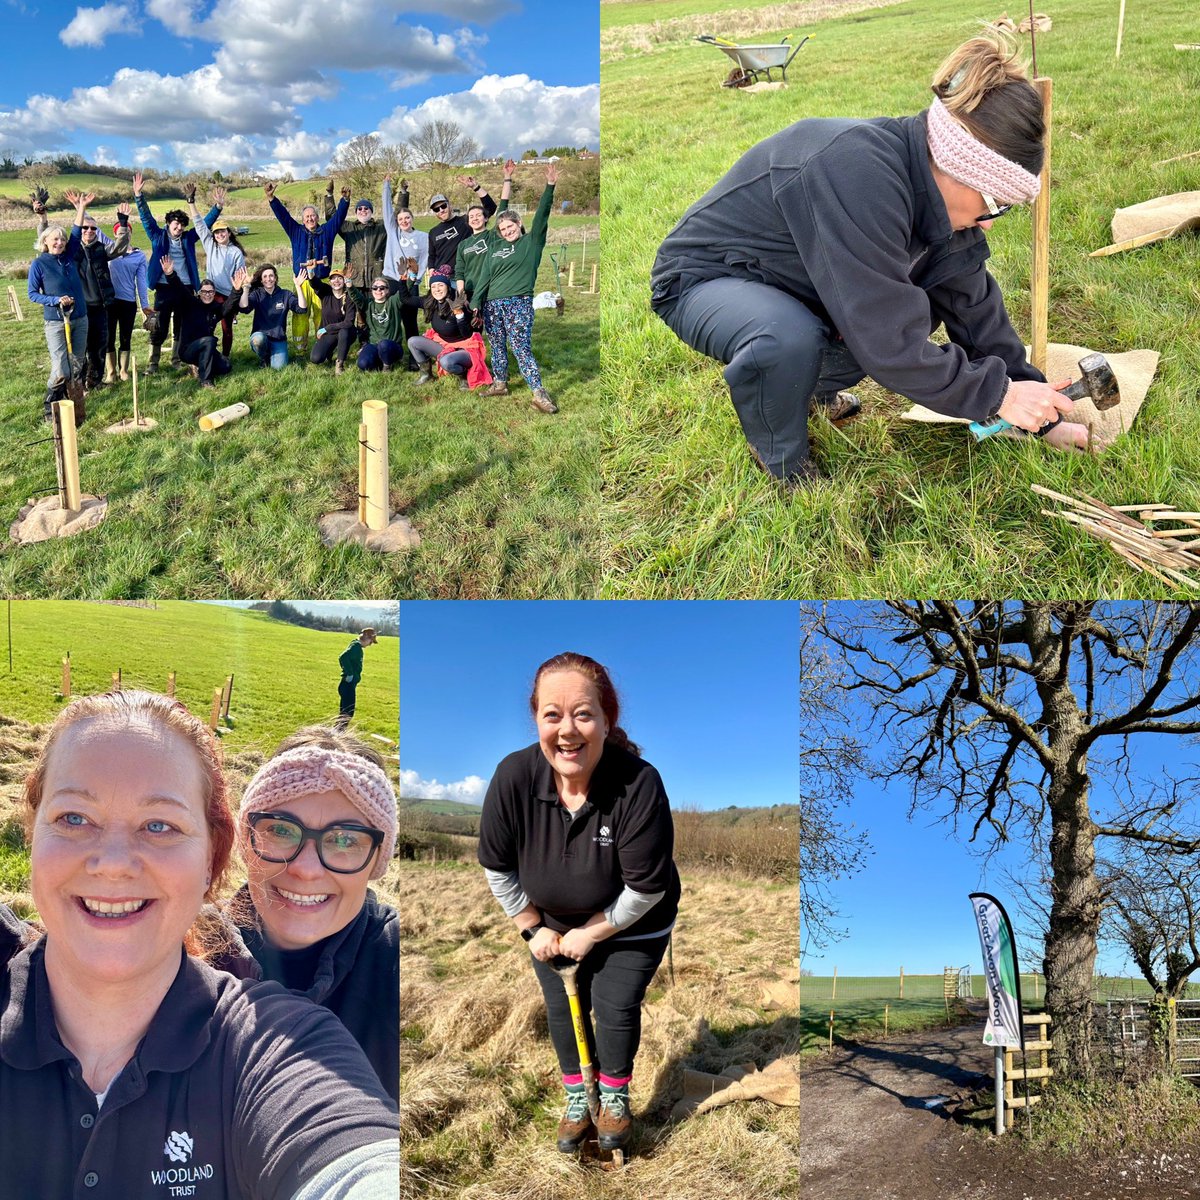 Great day tree planting with @AvonNeedsTrees with our partner @OVOEnergy in the sunshine today 🌳☀️ @WoodlandTrust #treeplanting #naturerecovery #biodiversity